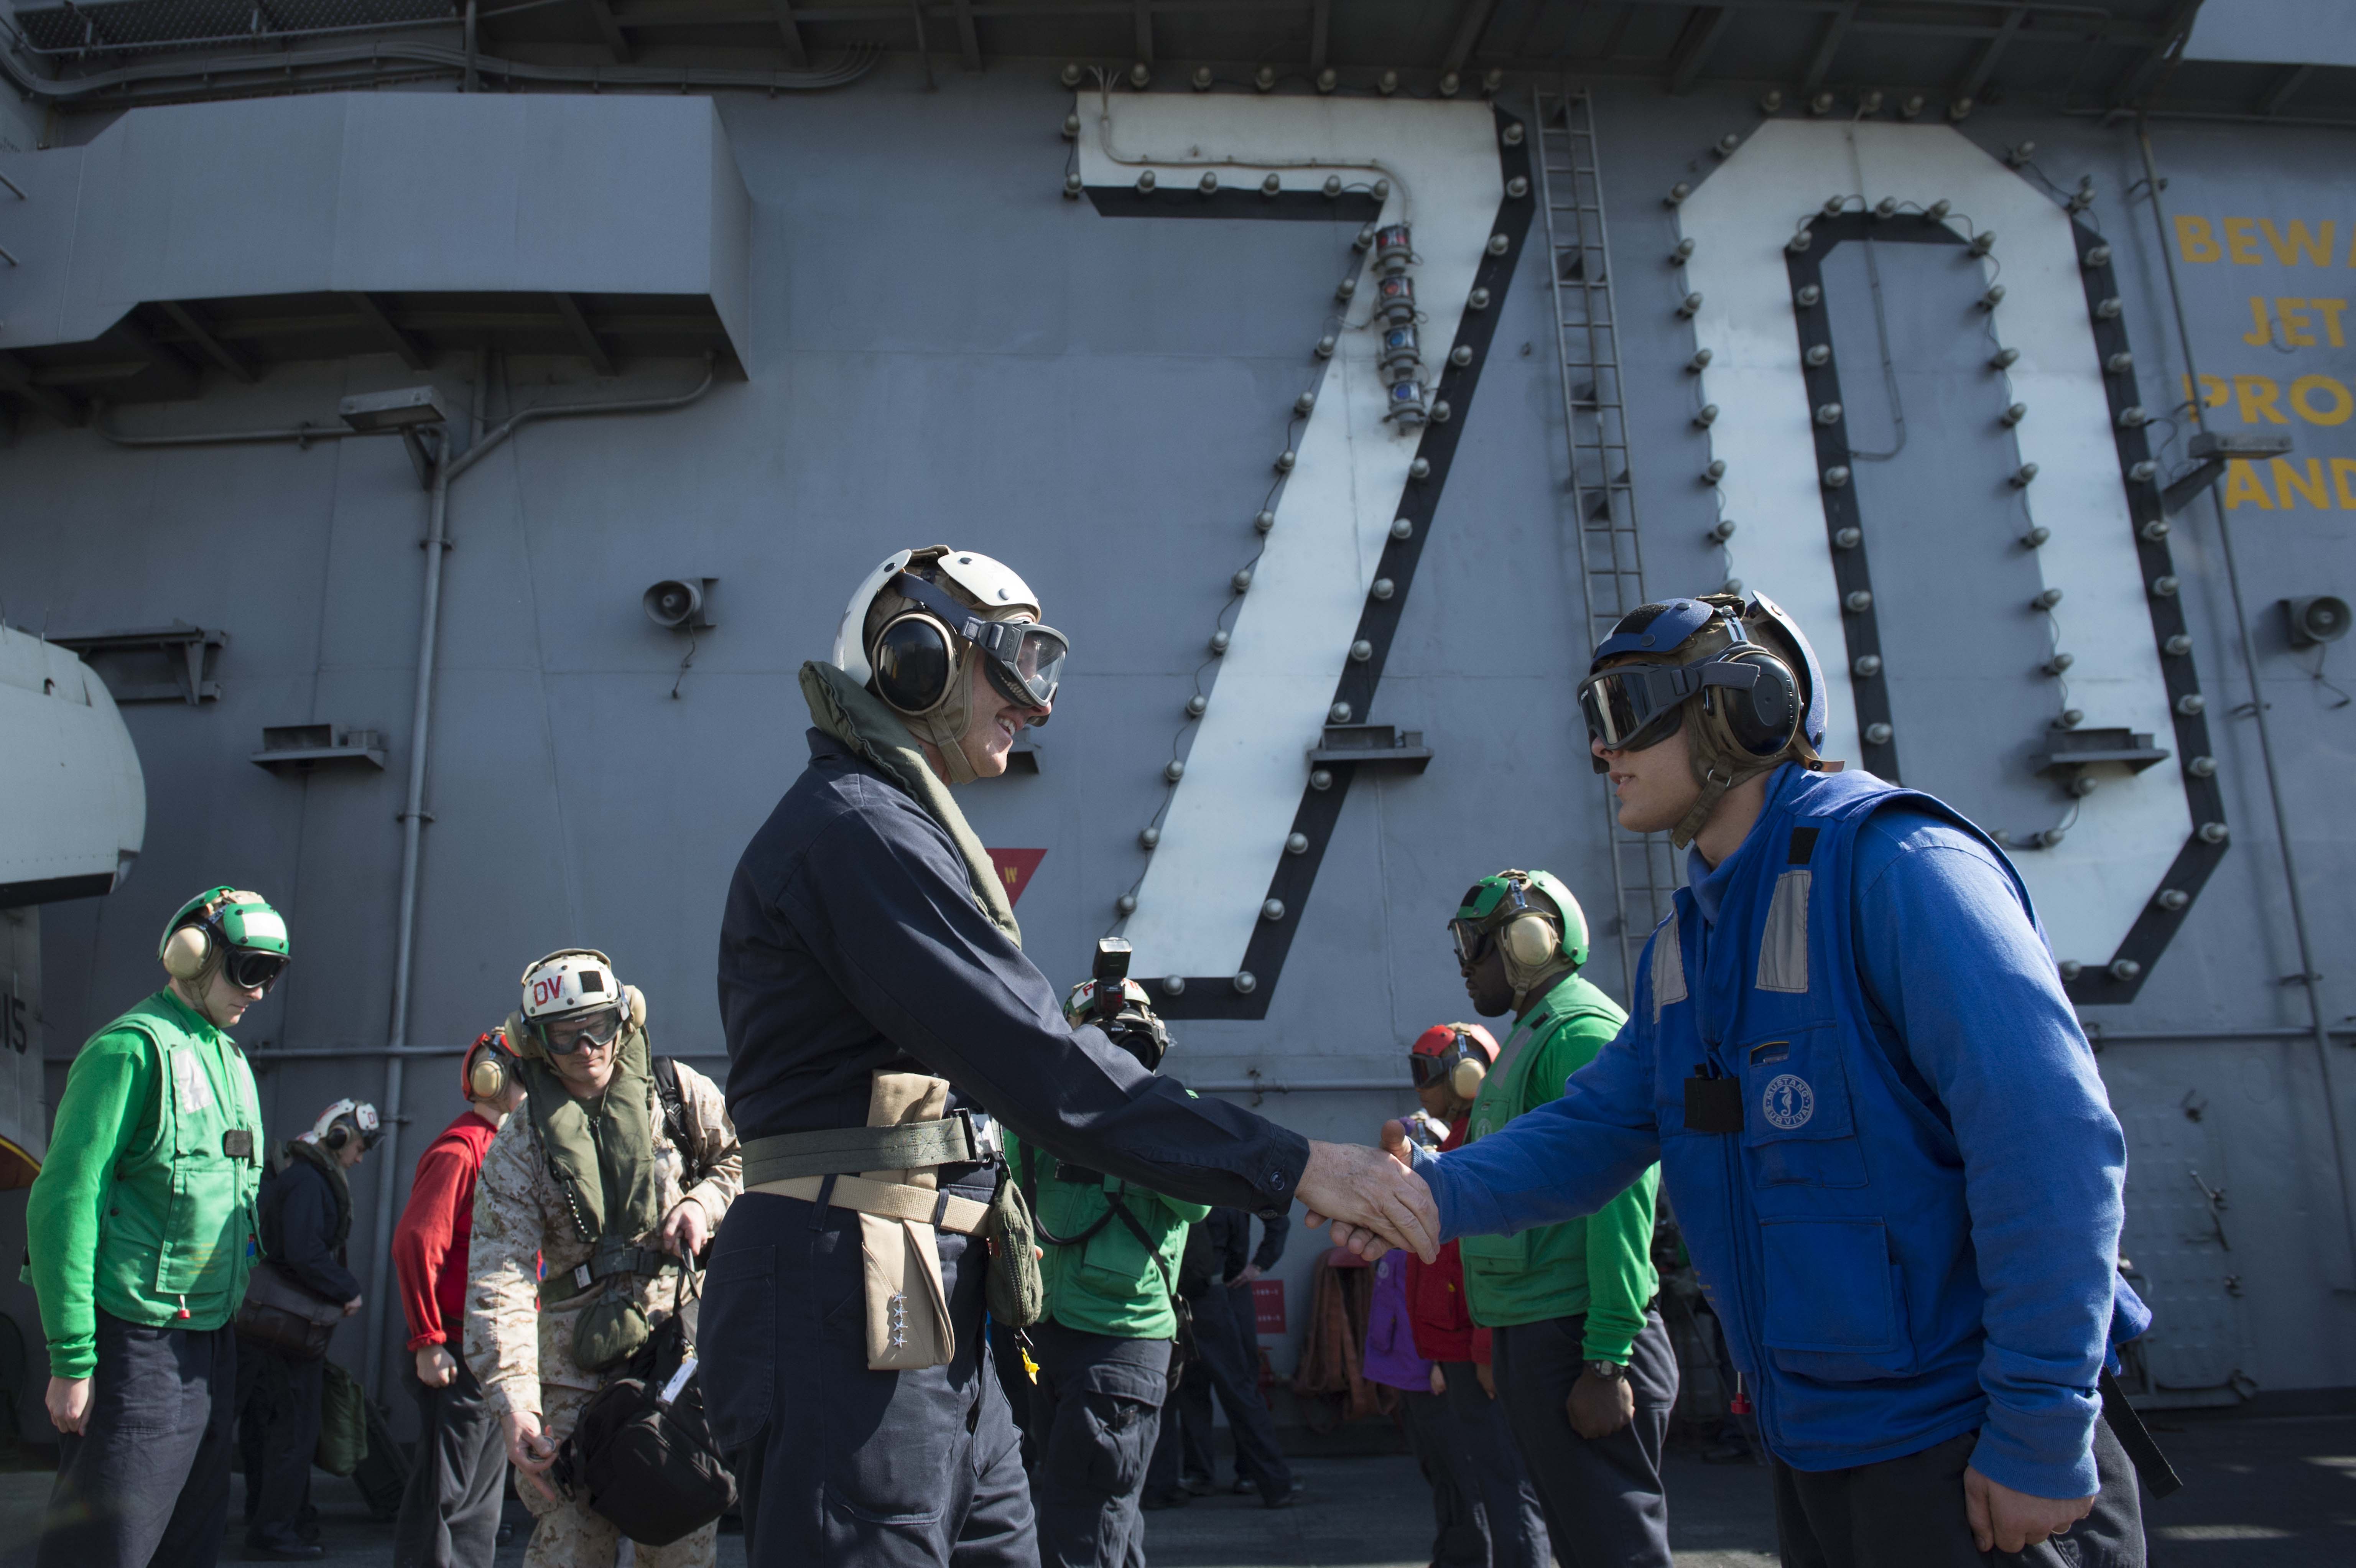 Chief of Naval Operations (CNO) Adm. Jonathan Greenert is welcomed aboard the aircraft carrier USS Carl Vinson (CVN 70) on Nov. 27, 2014. US Navy Photo